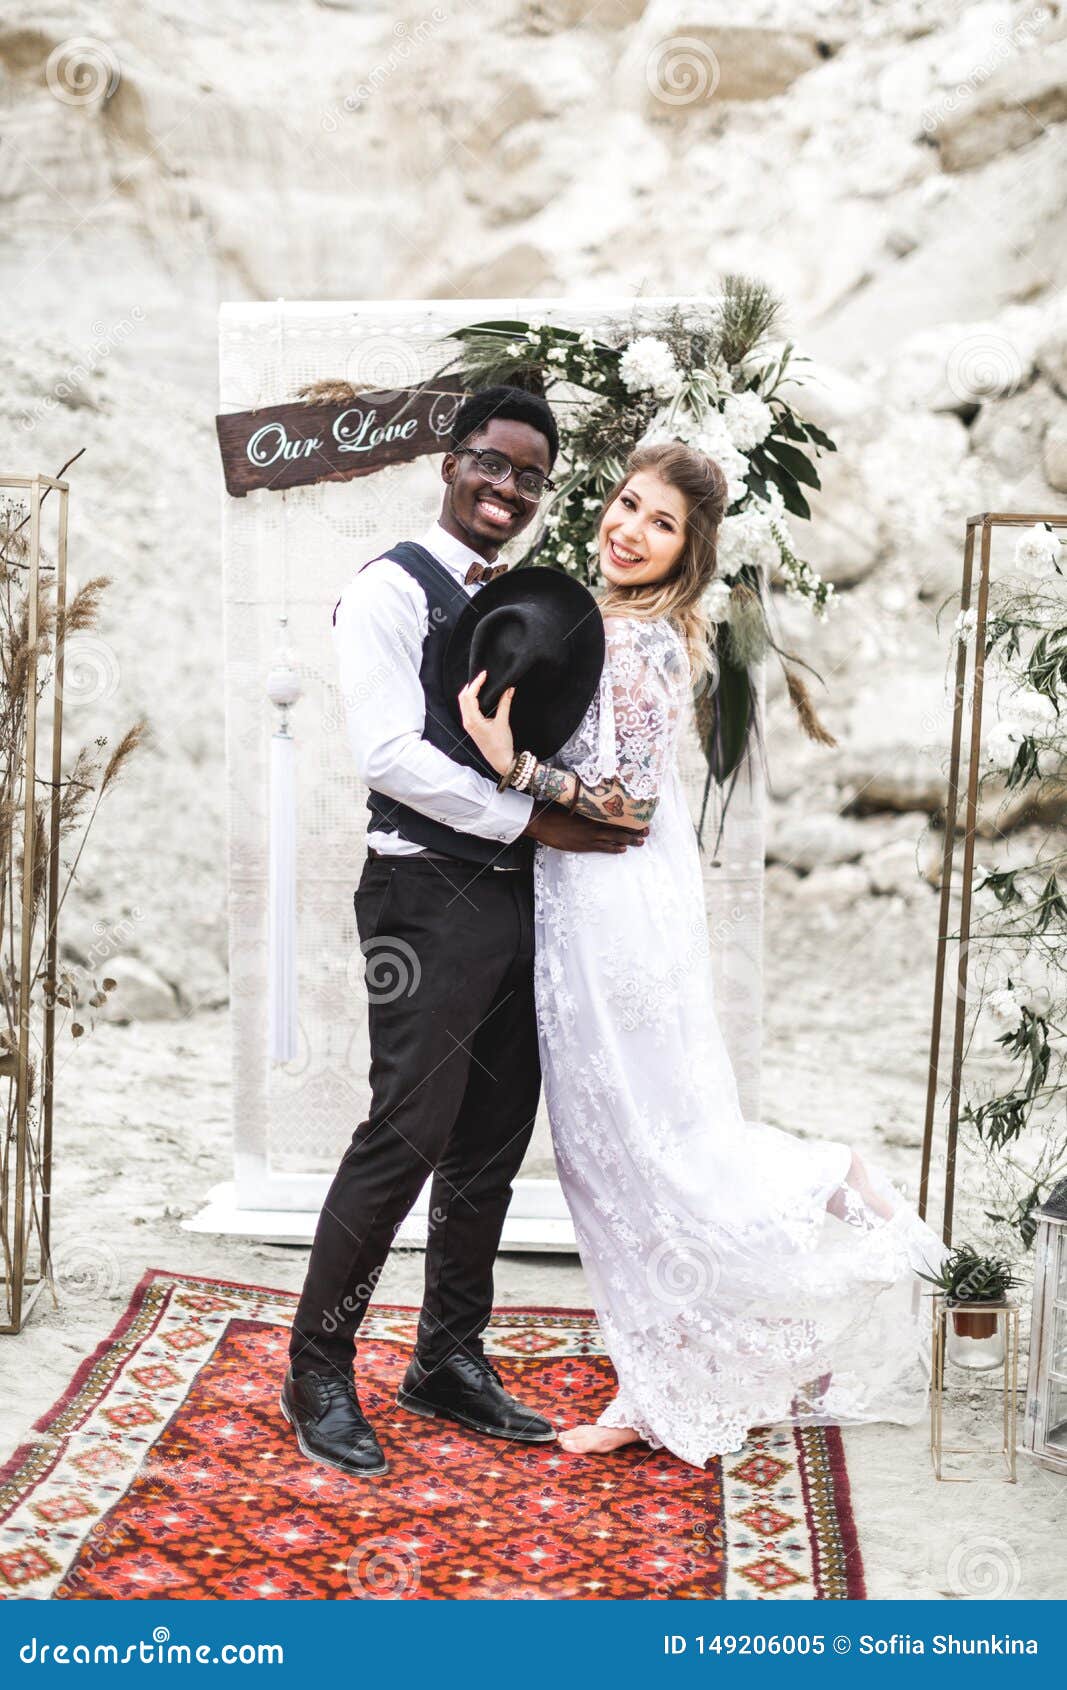 Funny Hippy Wedding Couple Dressed in Boho Style are Staying before the  Wedding Arch in Canyon Outdoors and Smiling Stock Image - Image of  beautiful, laugh: 149206005